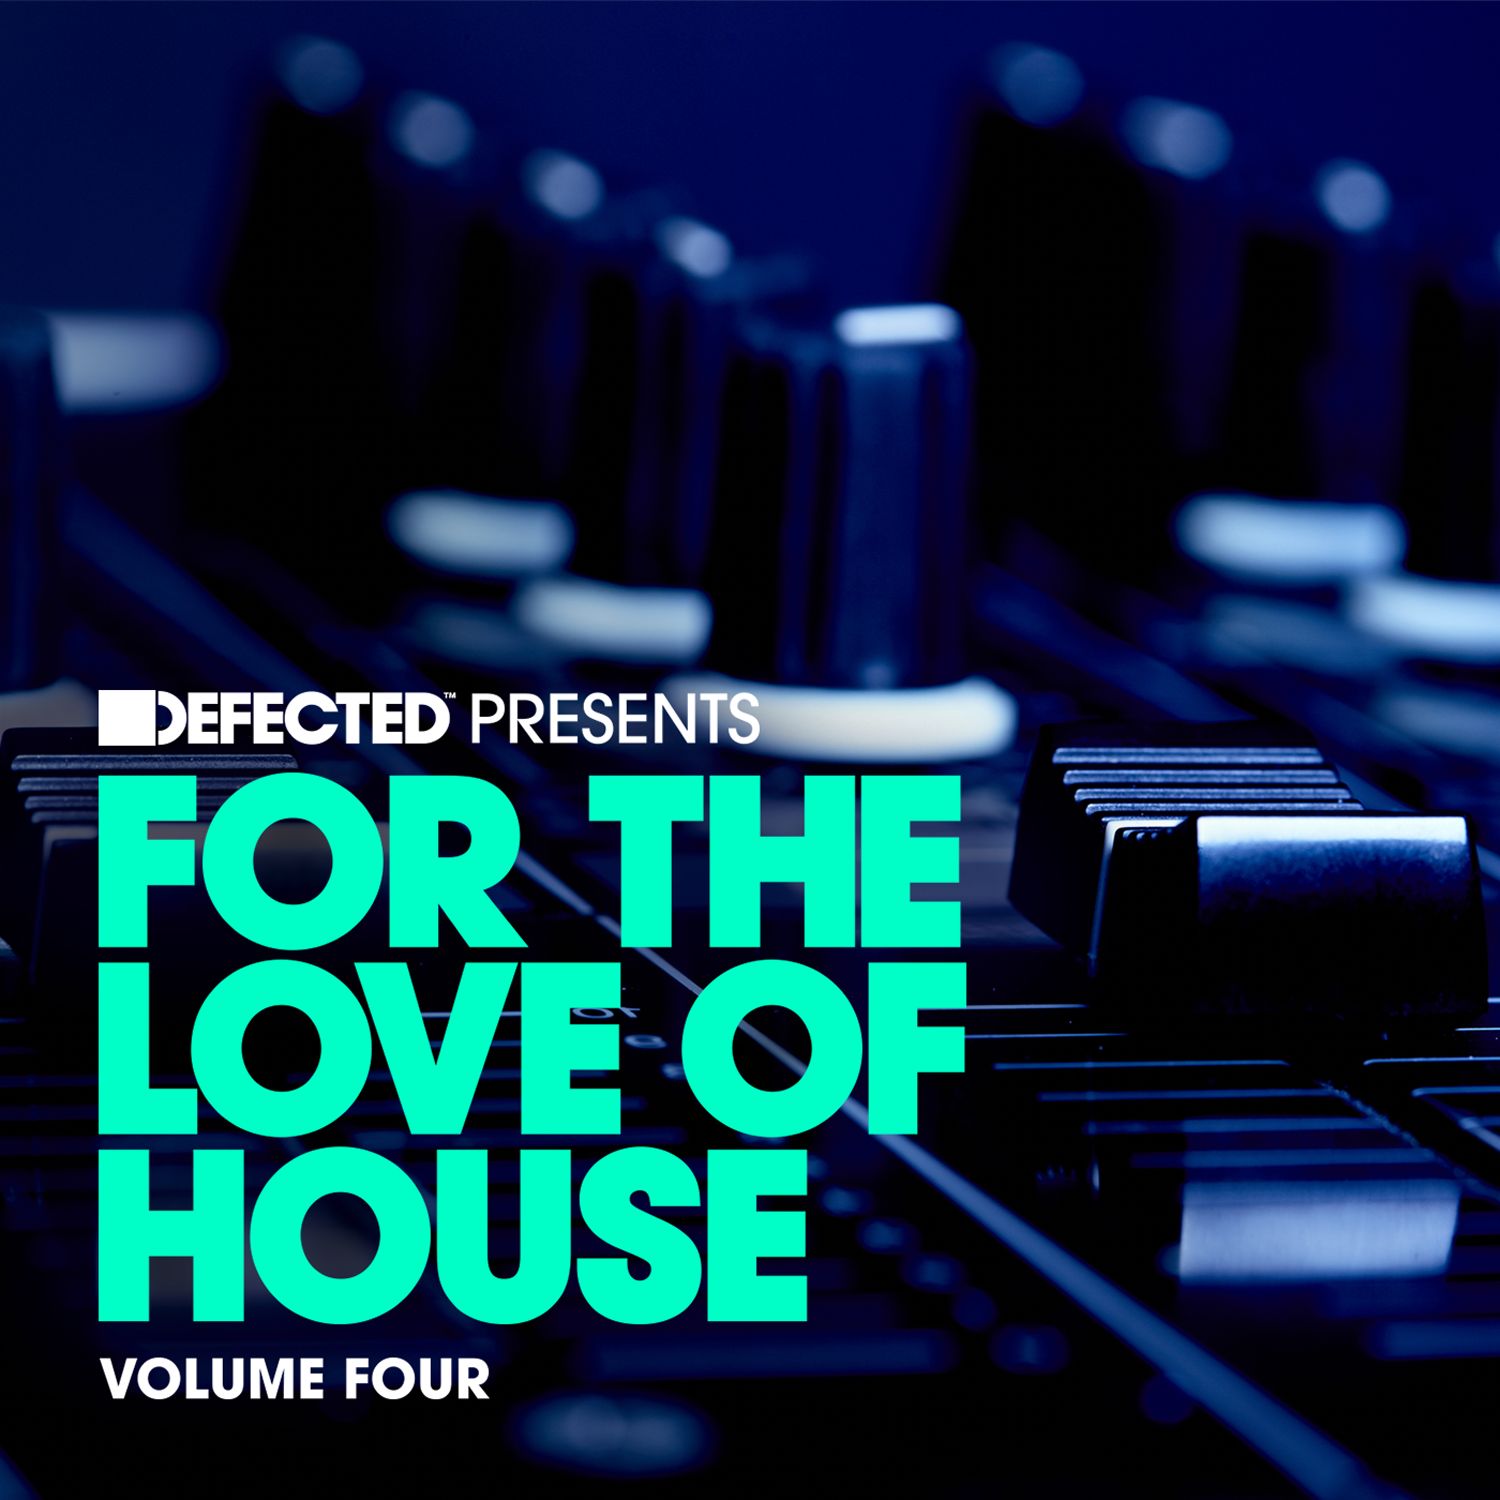 Defected Presents For The Love Of House Volume 4